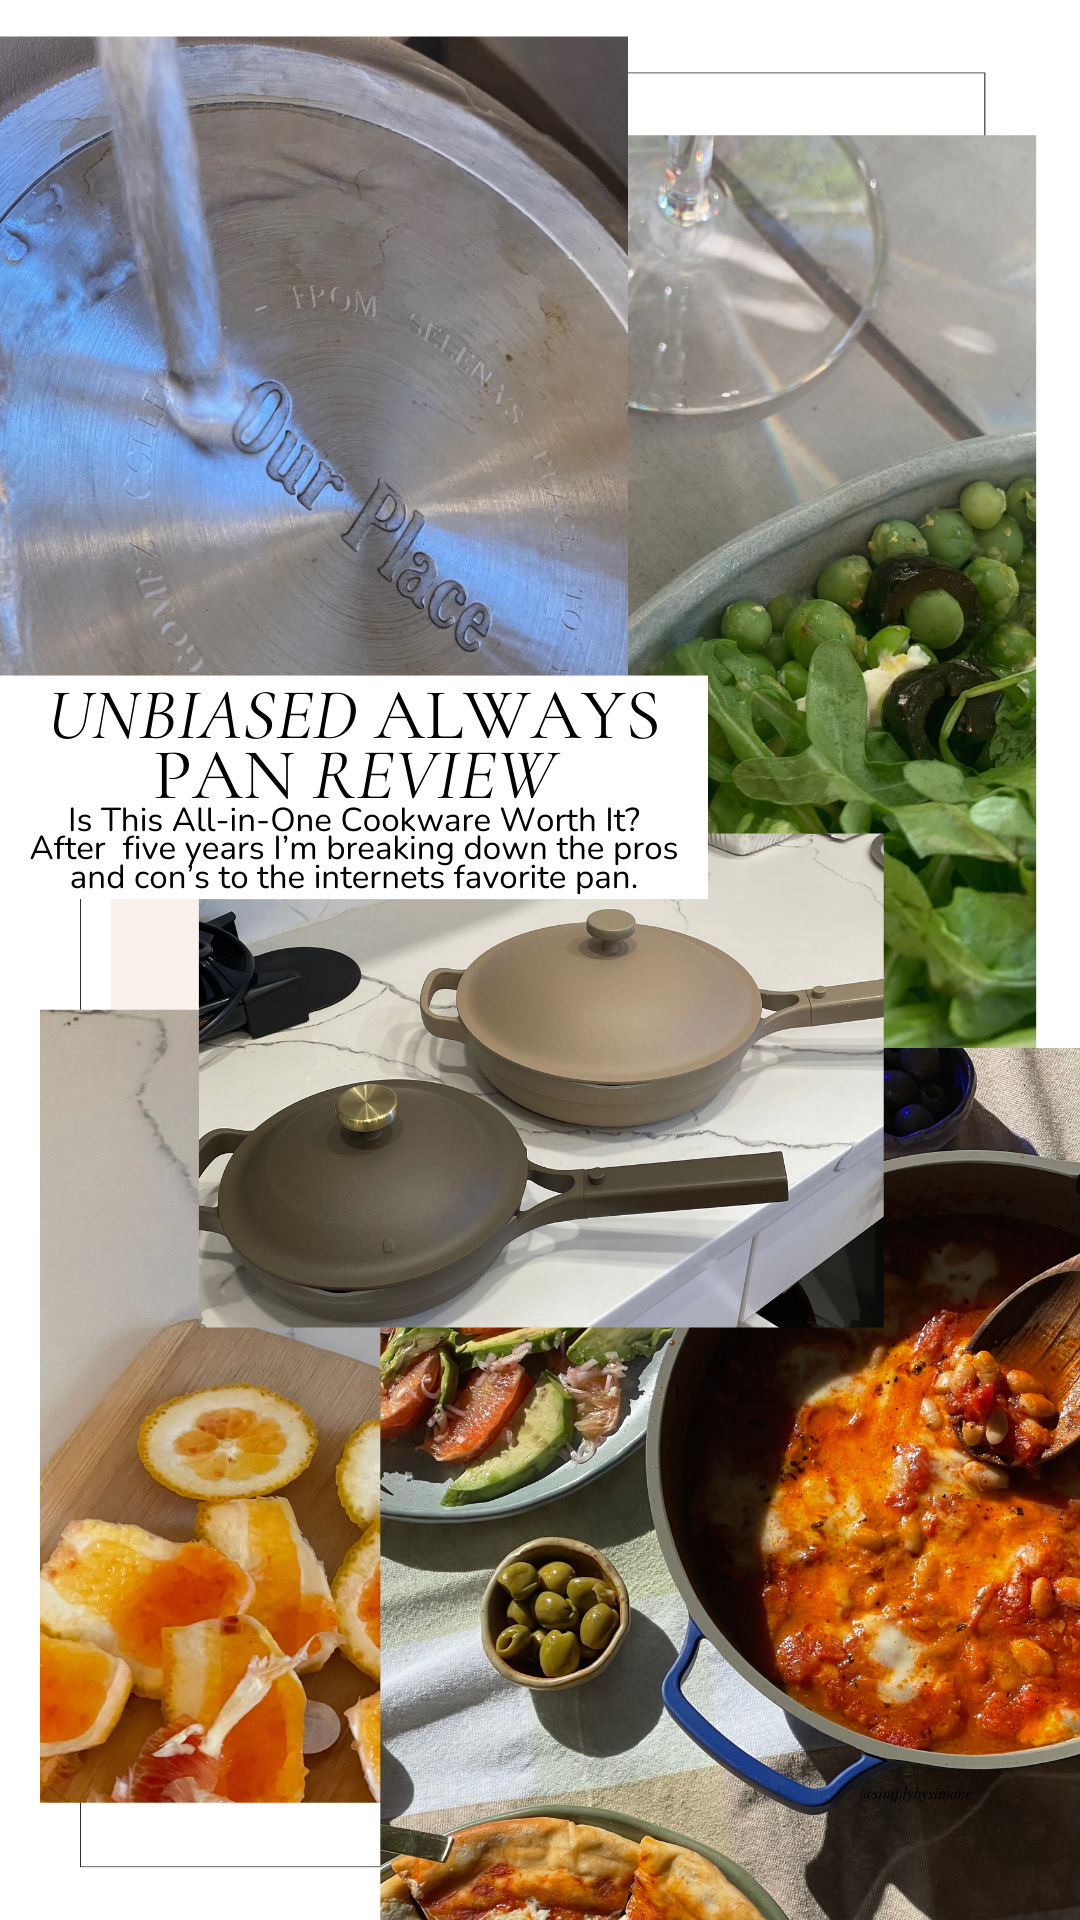 Unbiased Always Pan Review: Is This All-in-One Cookware Worth It?